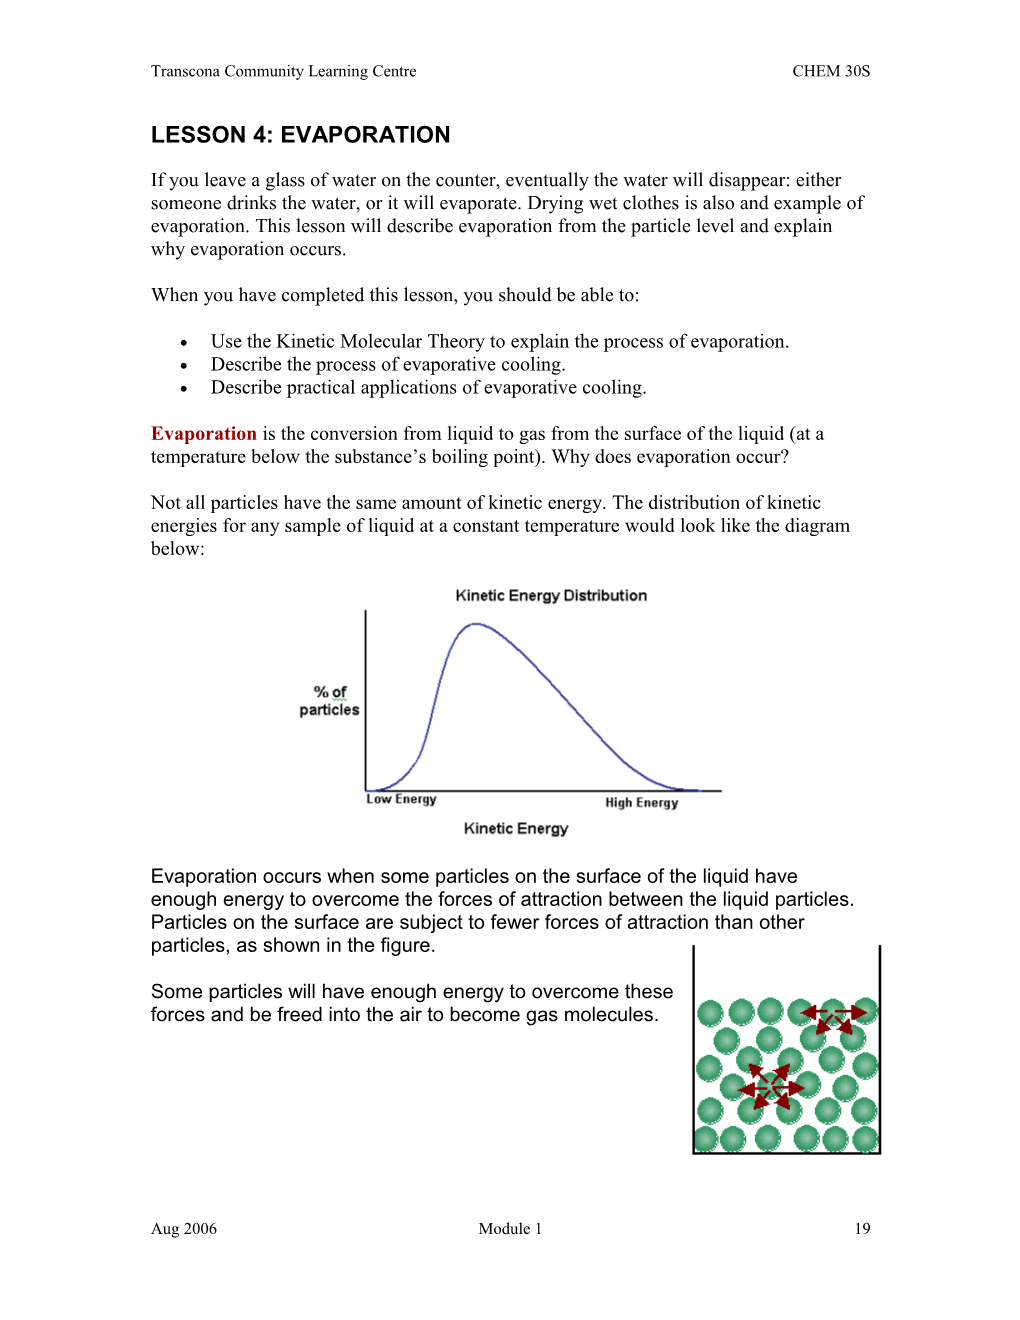 Lesson 2: Kinetic Molecular Theory